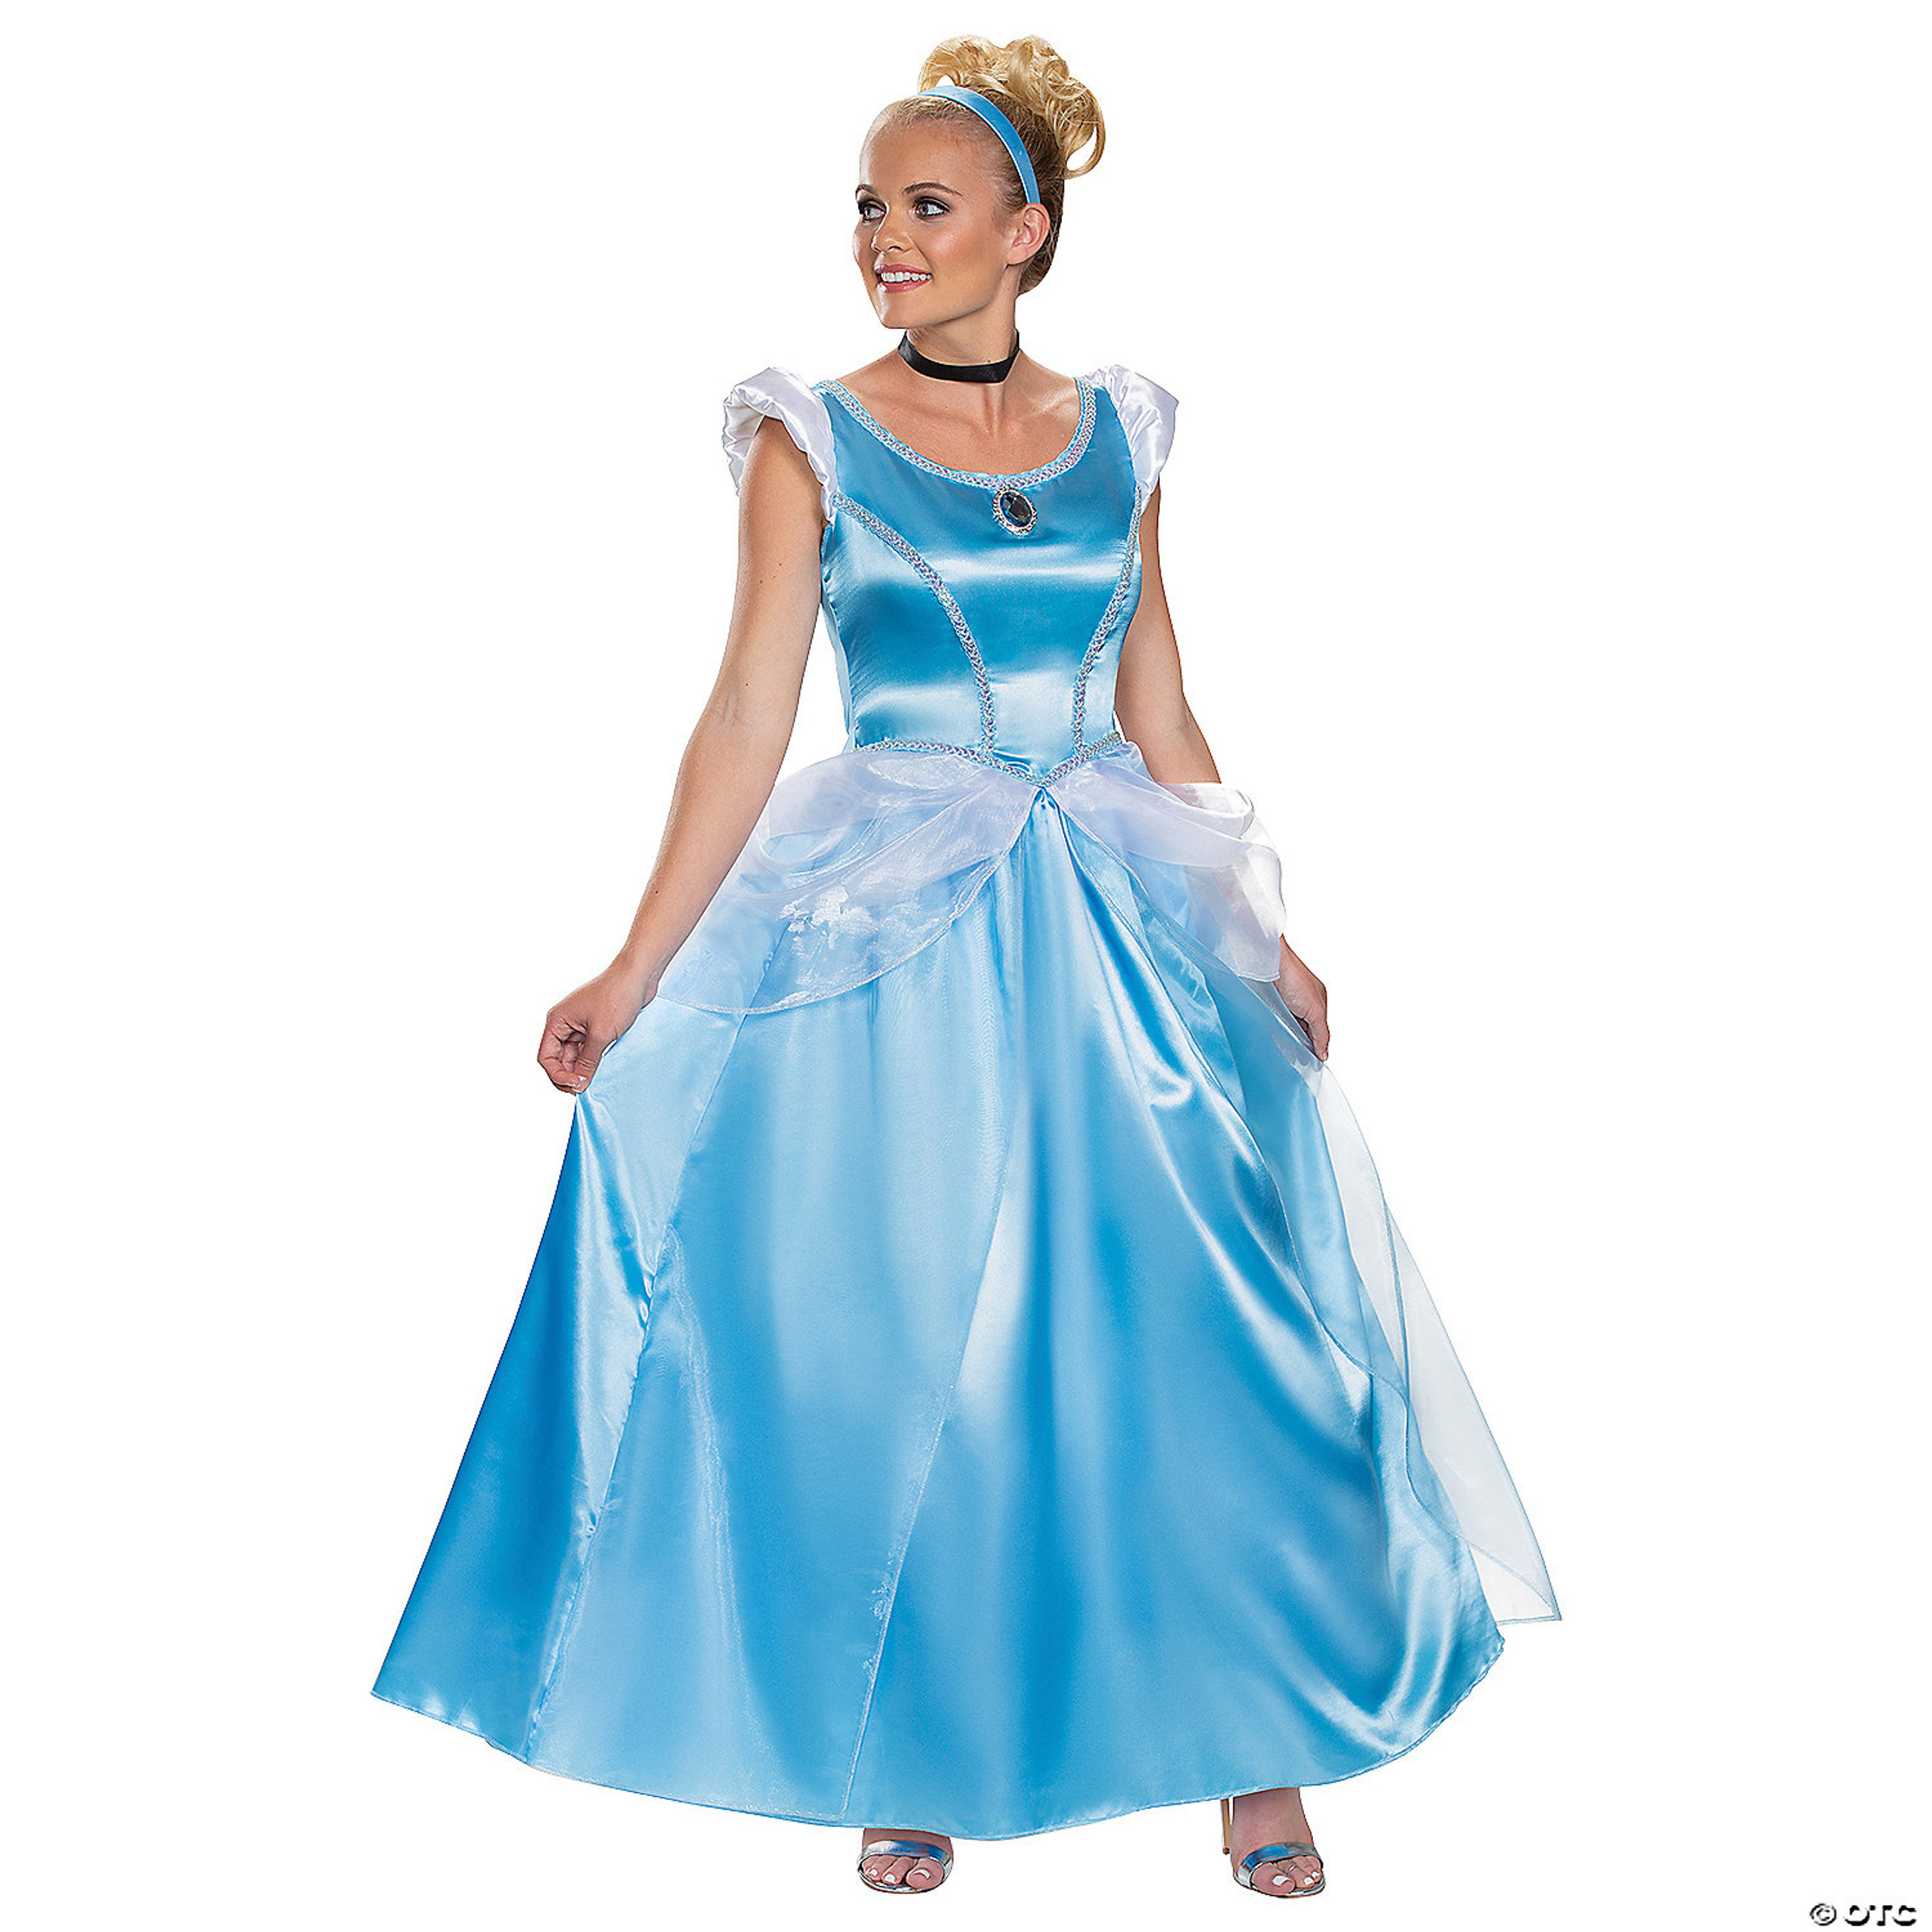 Adult TV & Movie Character Costumes For Women